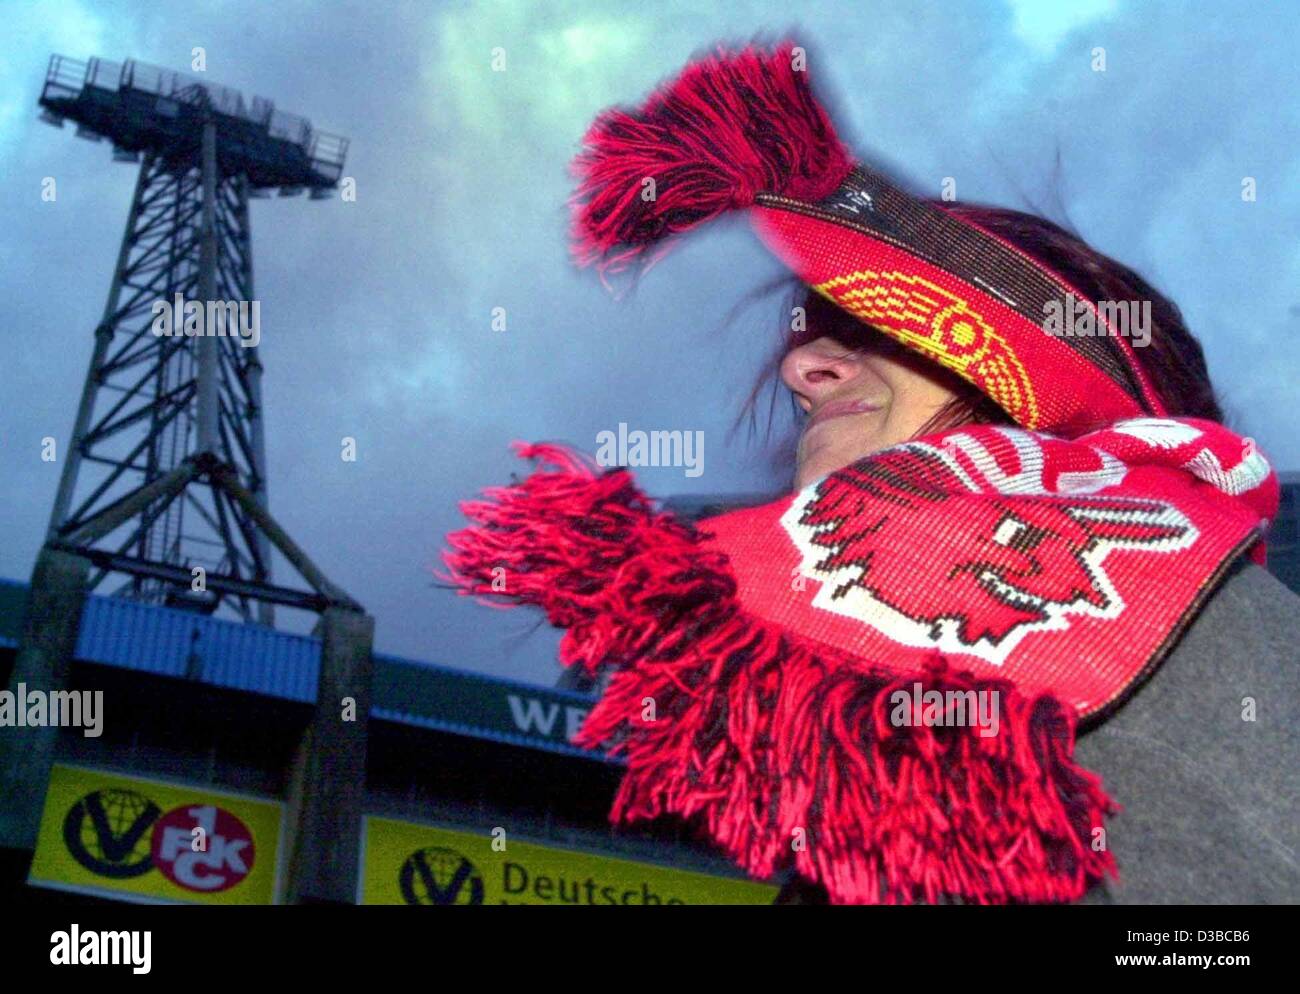 (dpa) - The storm blows the shawl into the face of a female soccer fan in front of the stadium in Kaiserslautern, Germany, 27 October 2002. The soccer match between the Kaiserslautern and Bochum teams was postponed due to the gale-force storms that swept across western Europe. Stock Photo